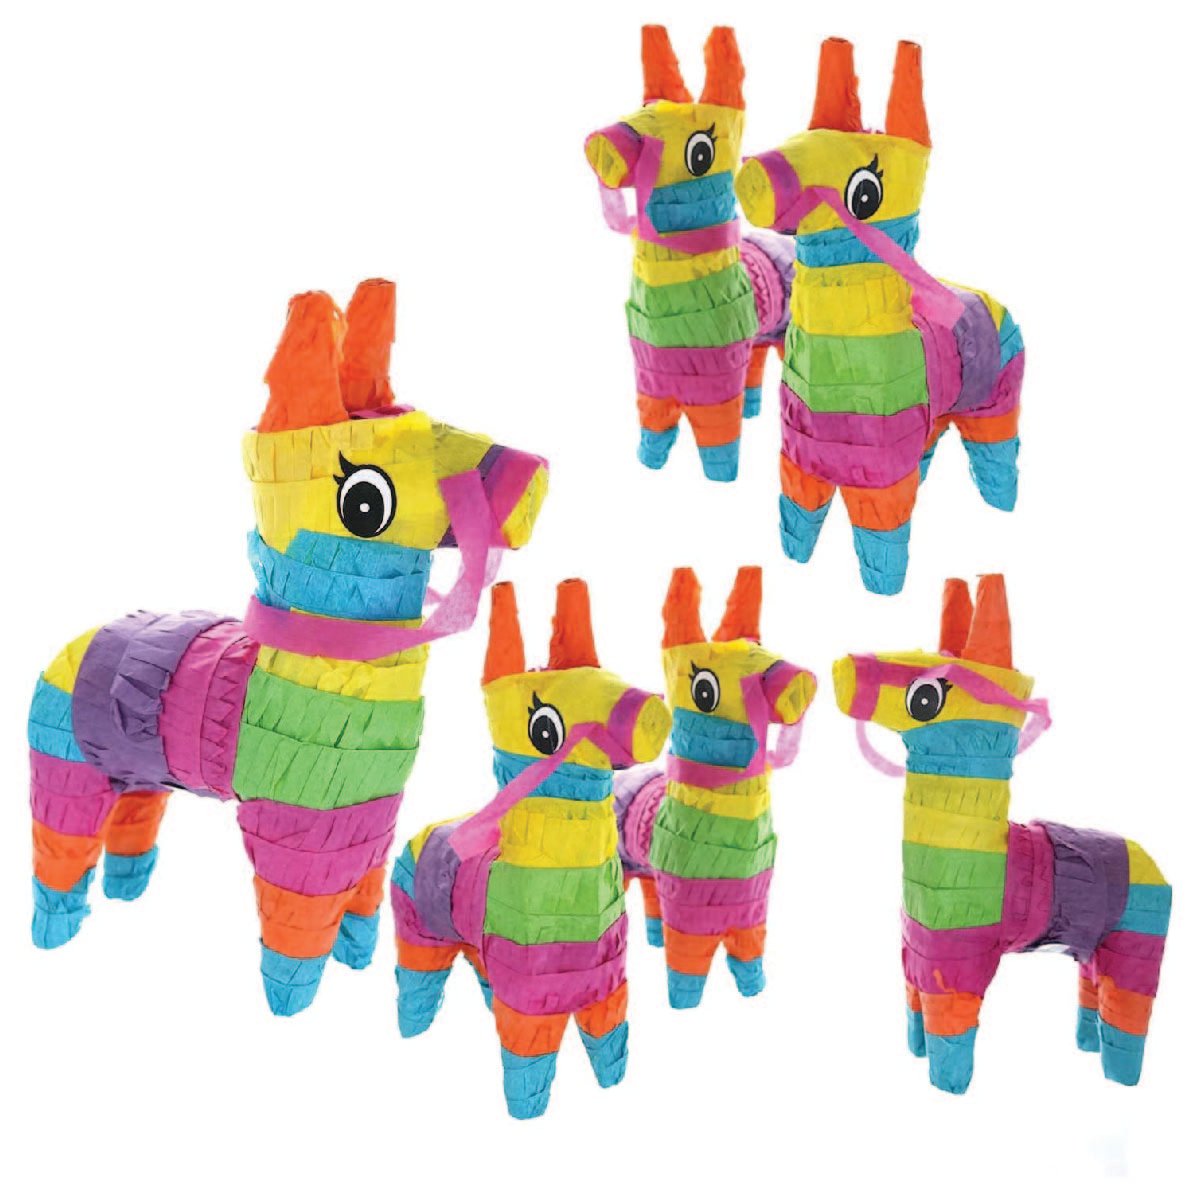 Mini donkey pinatas that can be used for decorations.